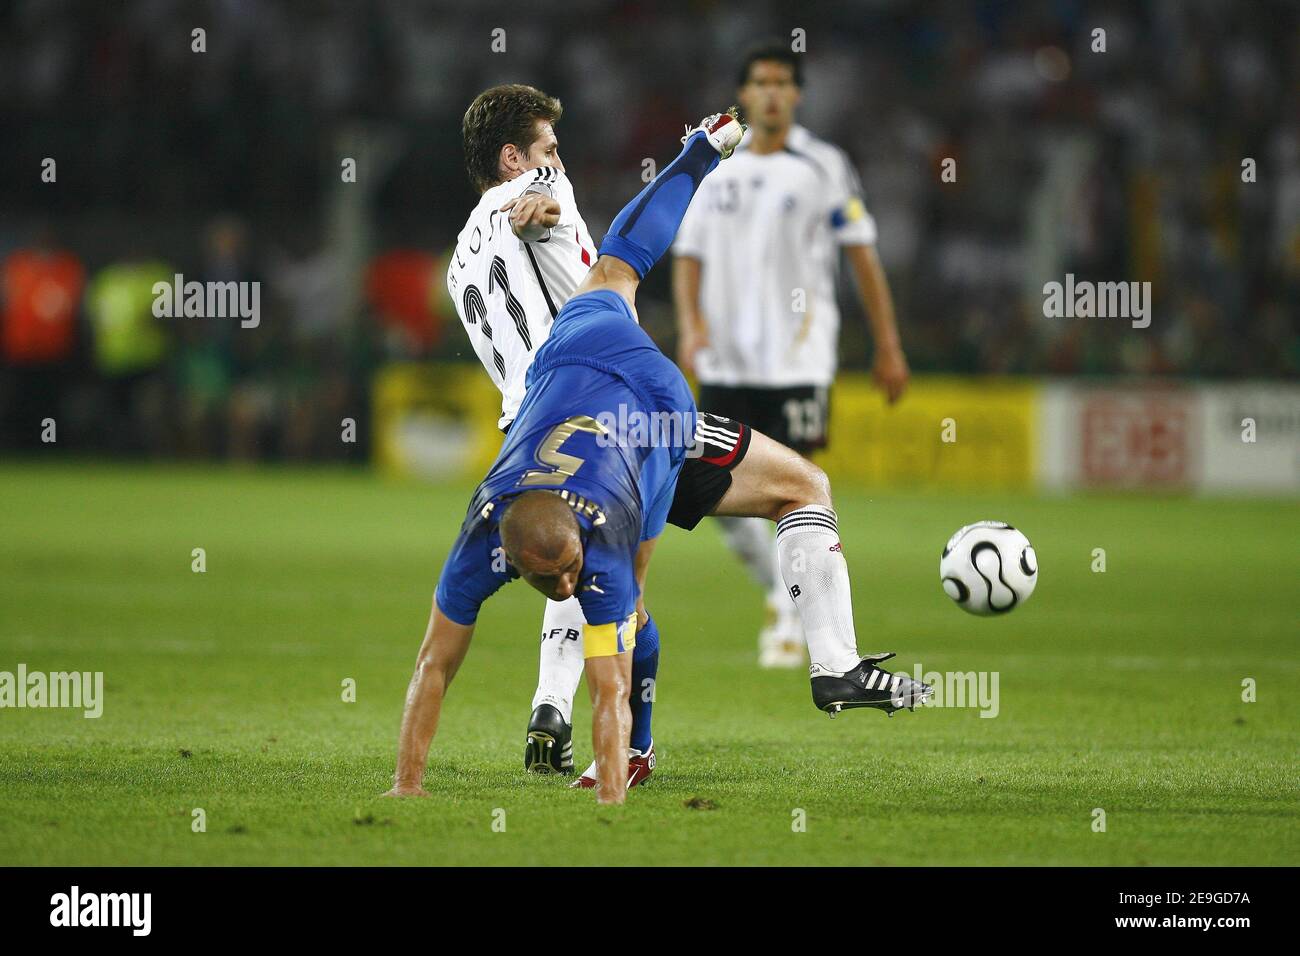 Italy's Sebastian Kehl and Miroslav Klose battle for the ball during the World Cup 2006, semifinals, Italy vs Germany at the Signal Iduna Park stadium in Dortmund, Germany on July 4, 2006. Italy won 2-0. Photo by Christian Liewig/ABACAPRESS.COM Stock Photo